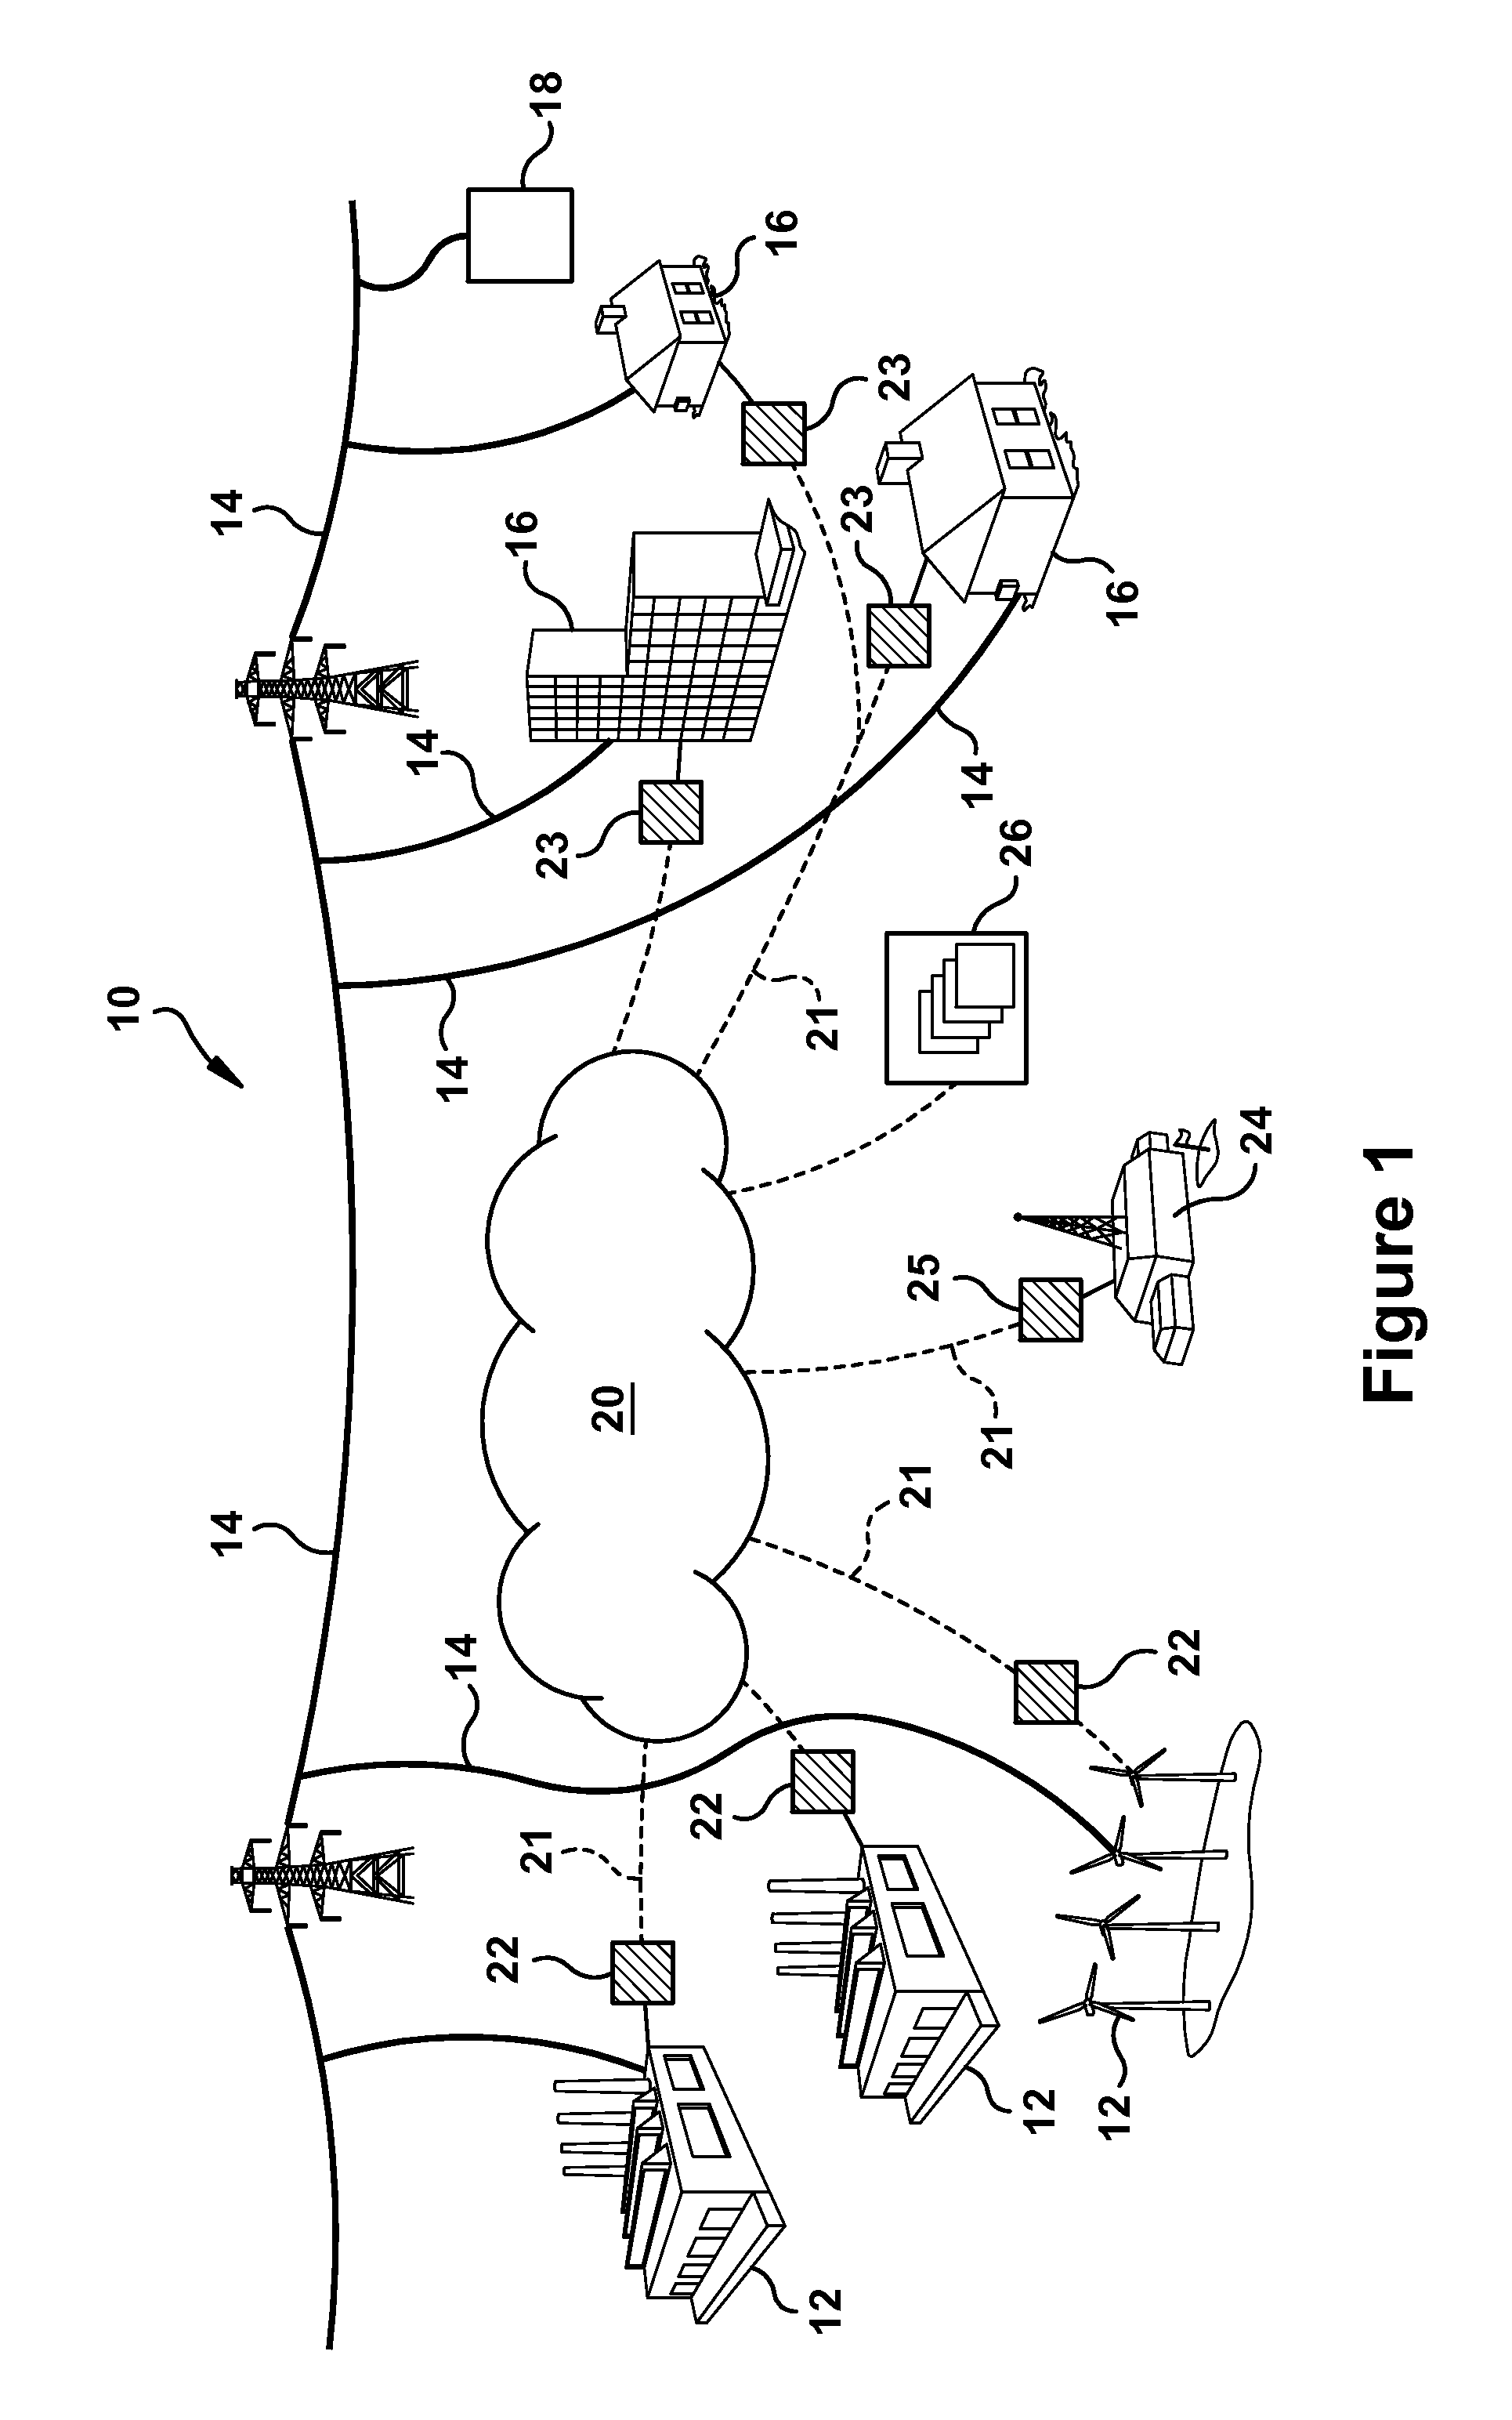 Methods and systems for enhancing control of power plant generating units